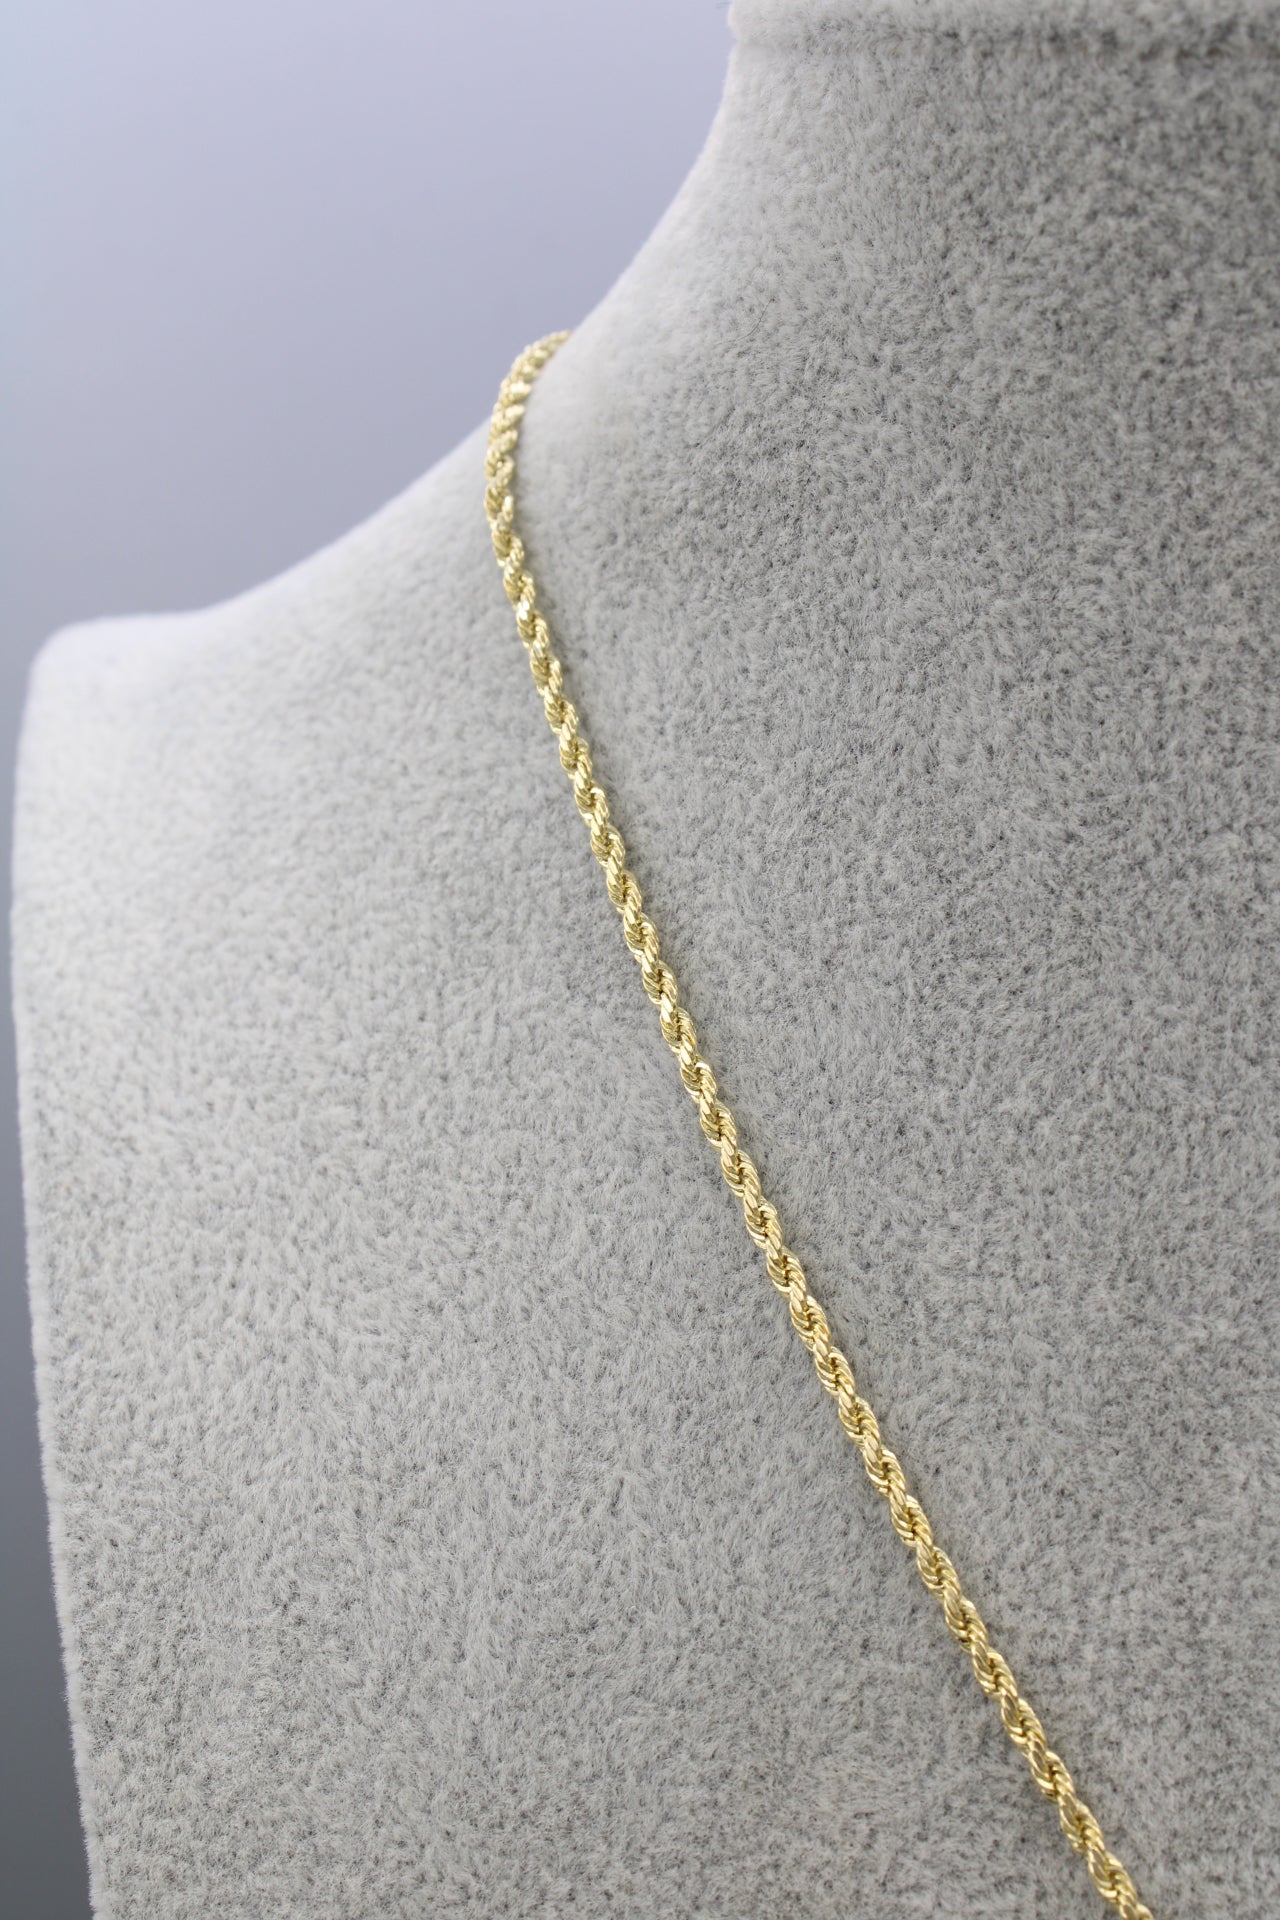 14K Hollow Rope Chain || Cubic Zirconia Crown Pendant